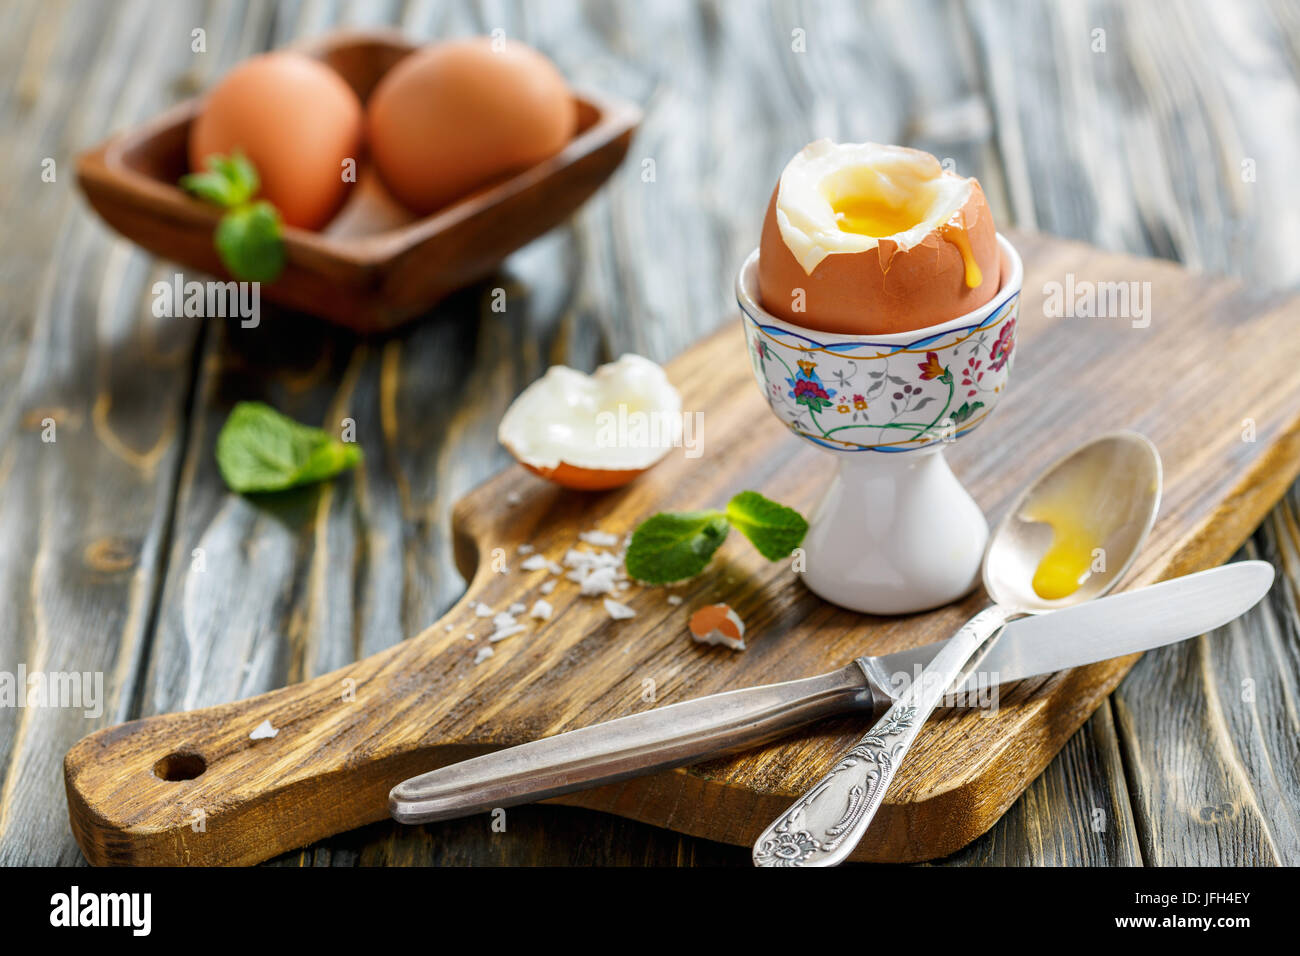 Boiled soft-boiled egg in the stand. Stock Photo